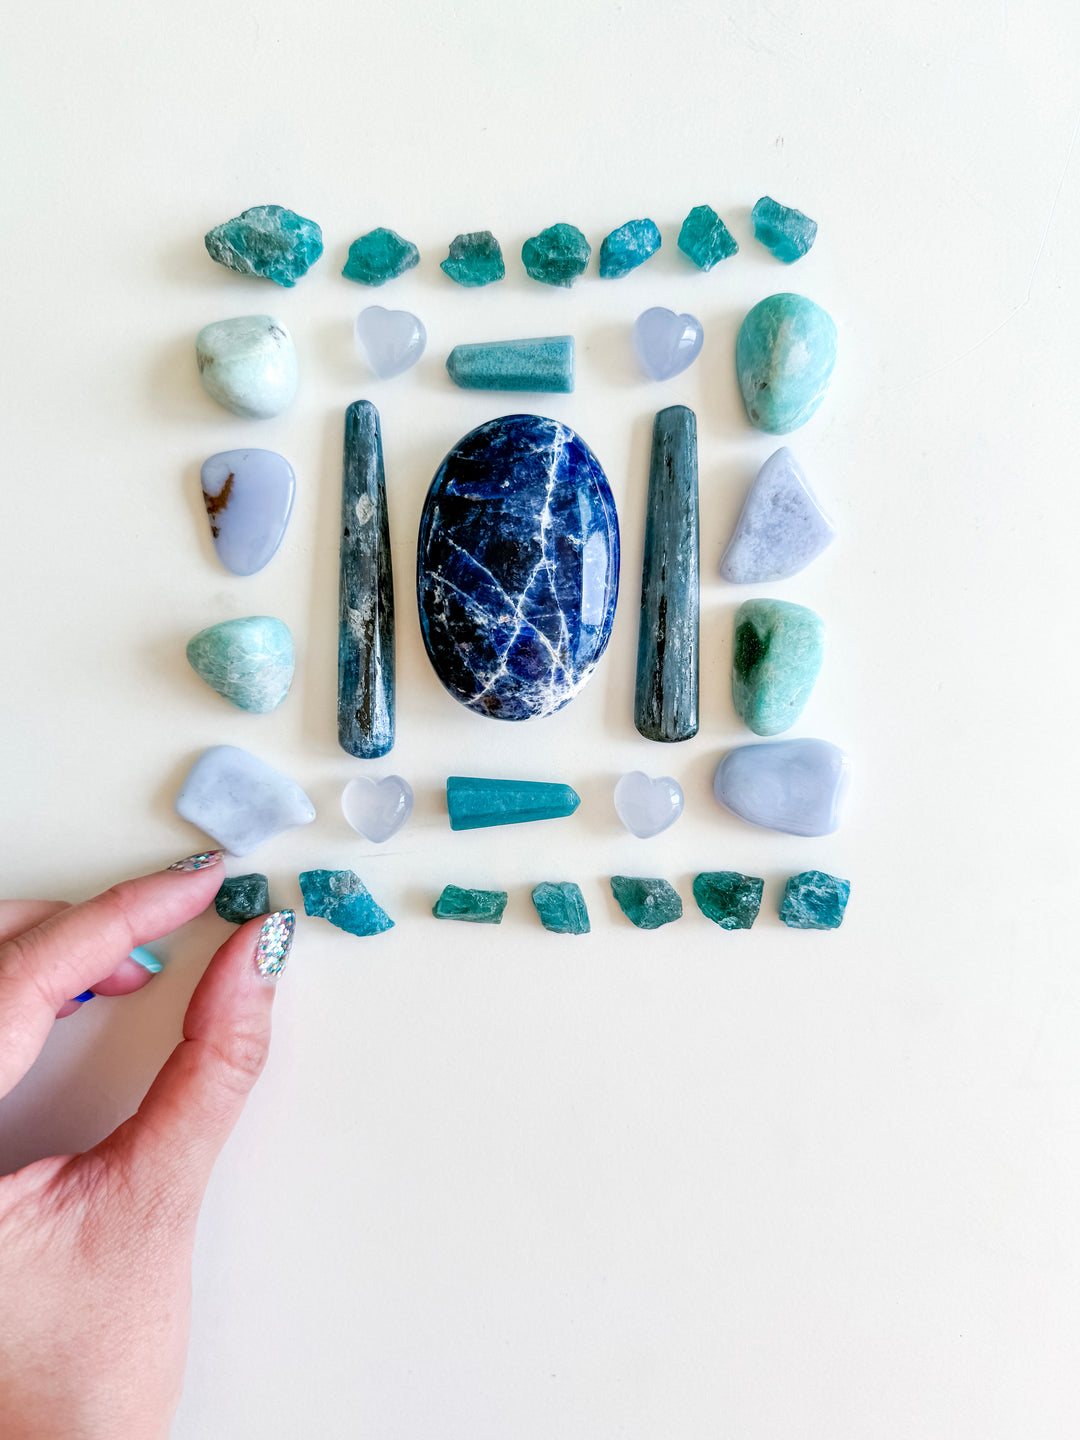 Best of Blue Bundle | Grid for Calming + Self-Trust + Reflection + Peace